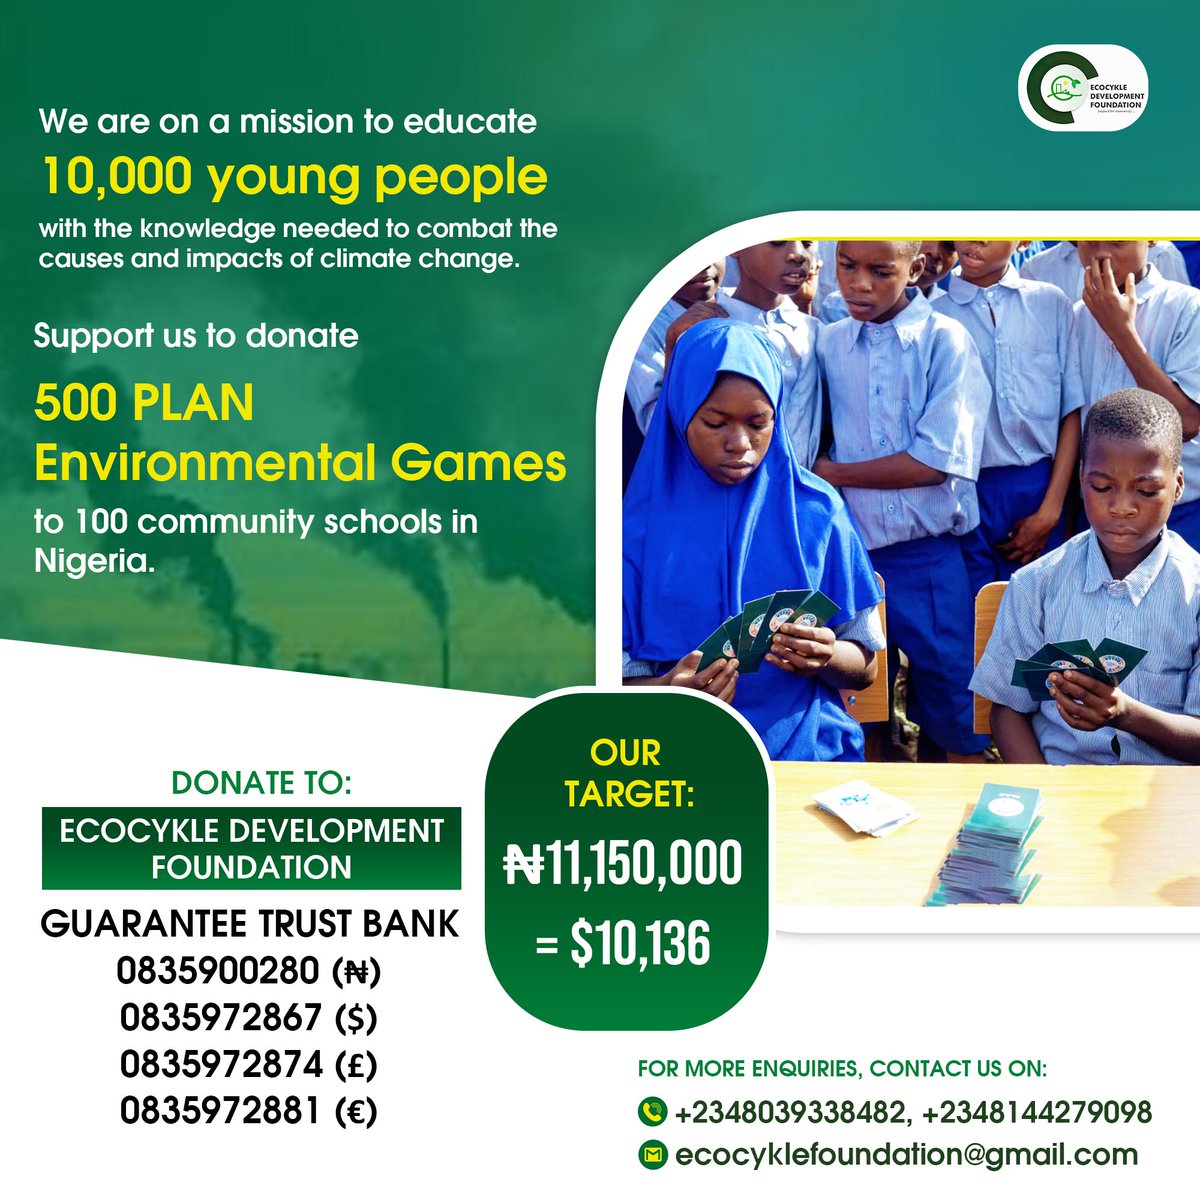 Your donation will groom the next generation of champions to combat climate change and save humanity. Donate today!! #Ecocykle #PLAN #PLANGame #ClimateActionNow @IHSTowers @UNDPNigeria @LEAPAfrica @EndeavorNigeria @SurgeAfricaOrg @SustyVibes @hbsNigeria @eet_foundation